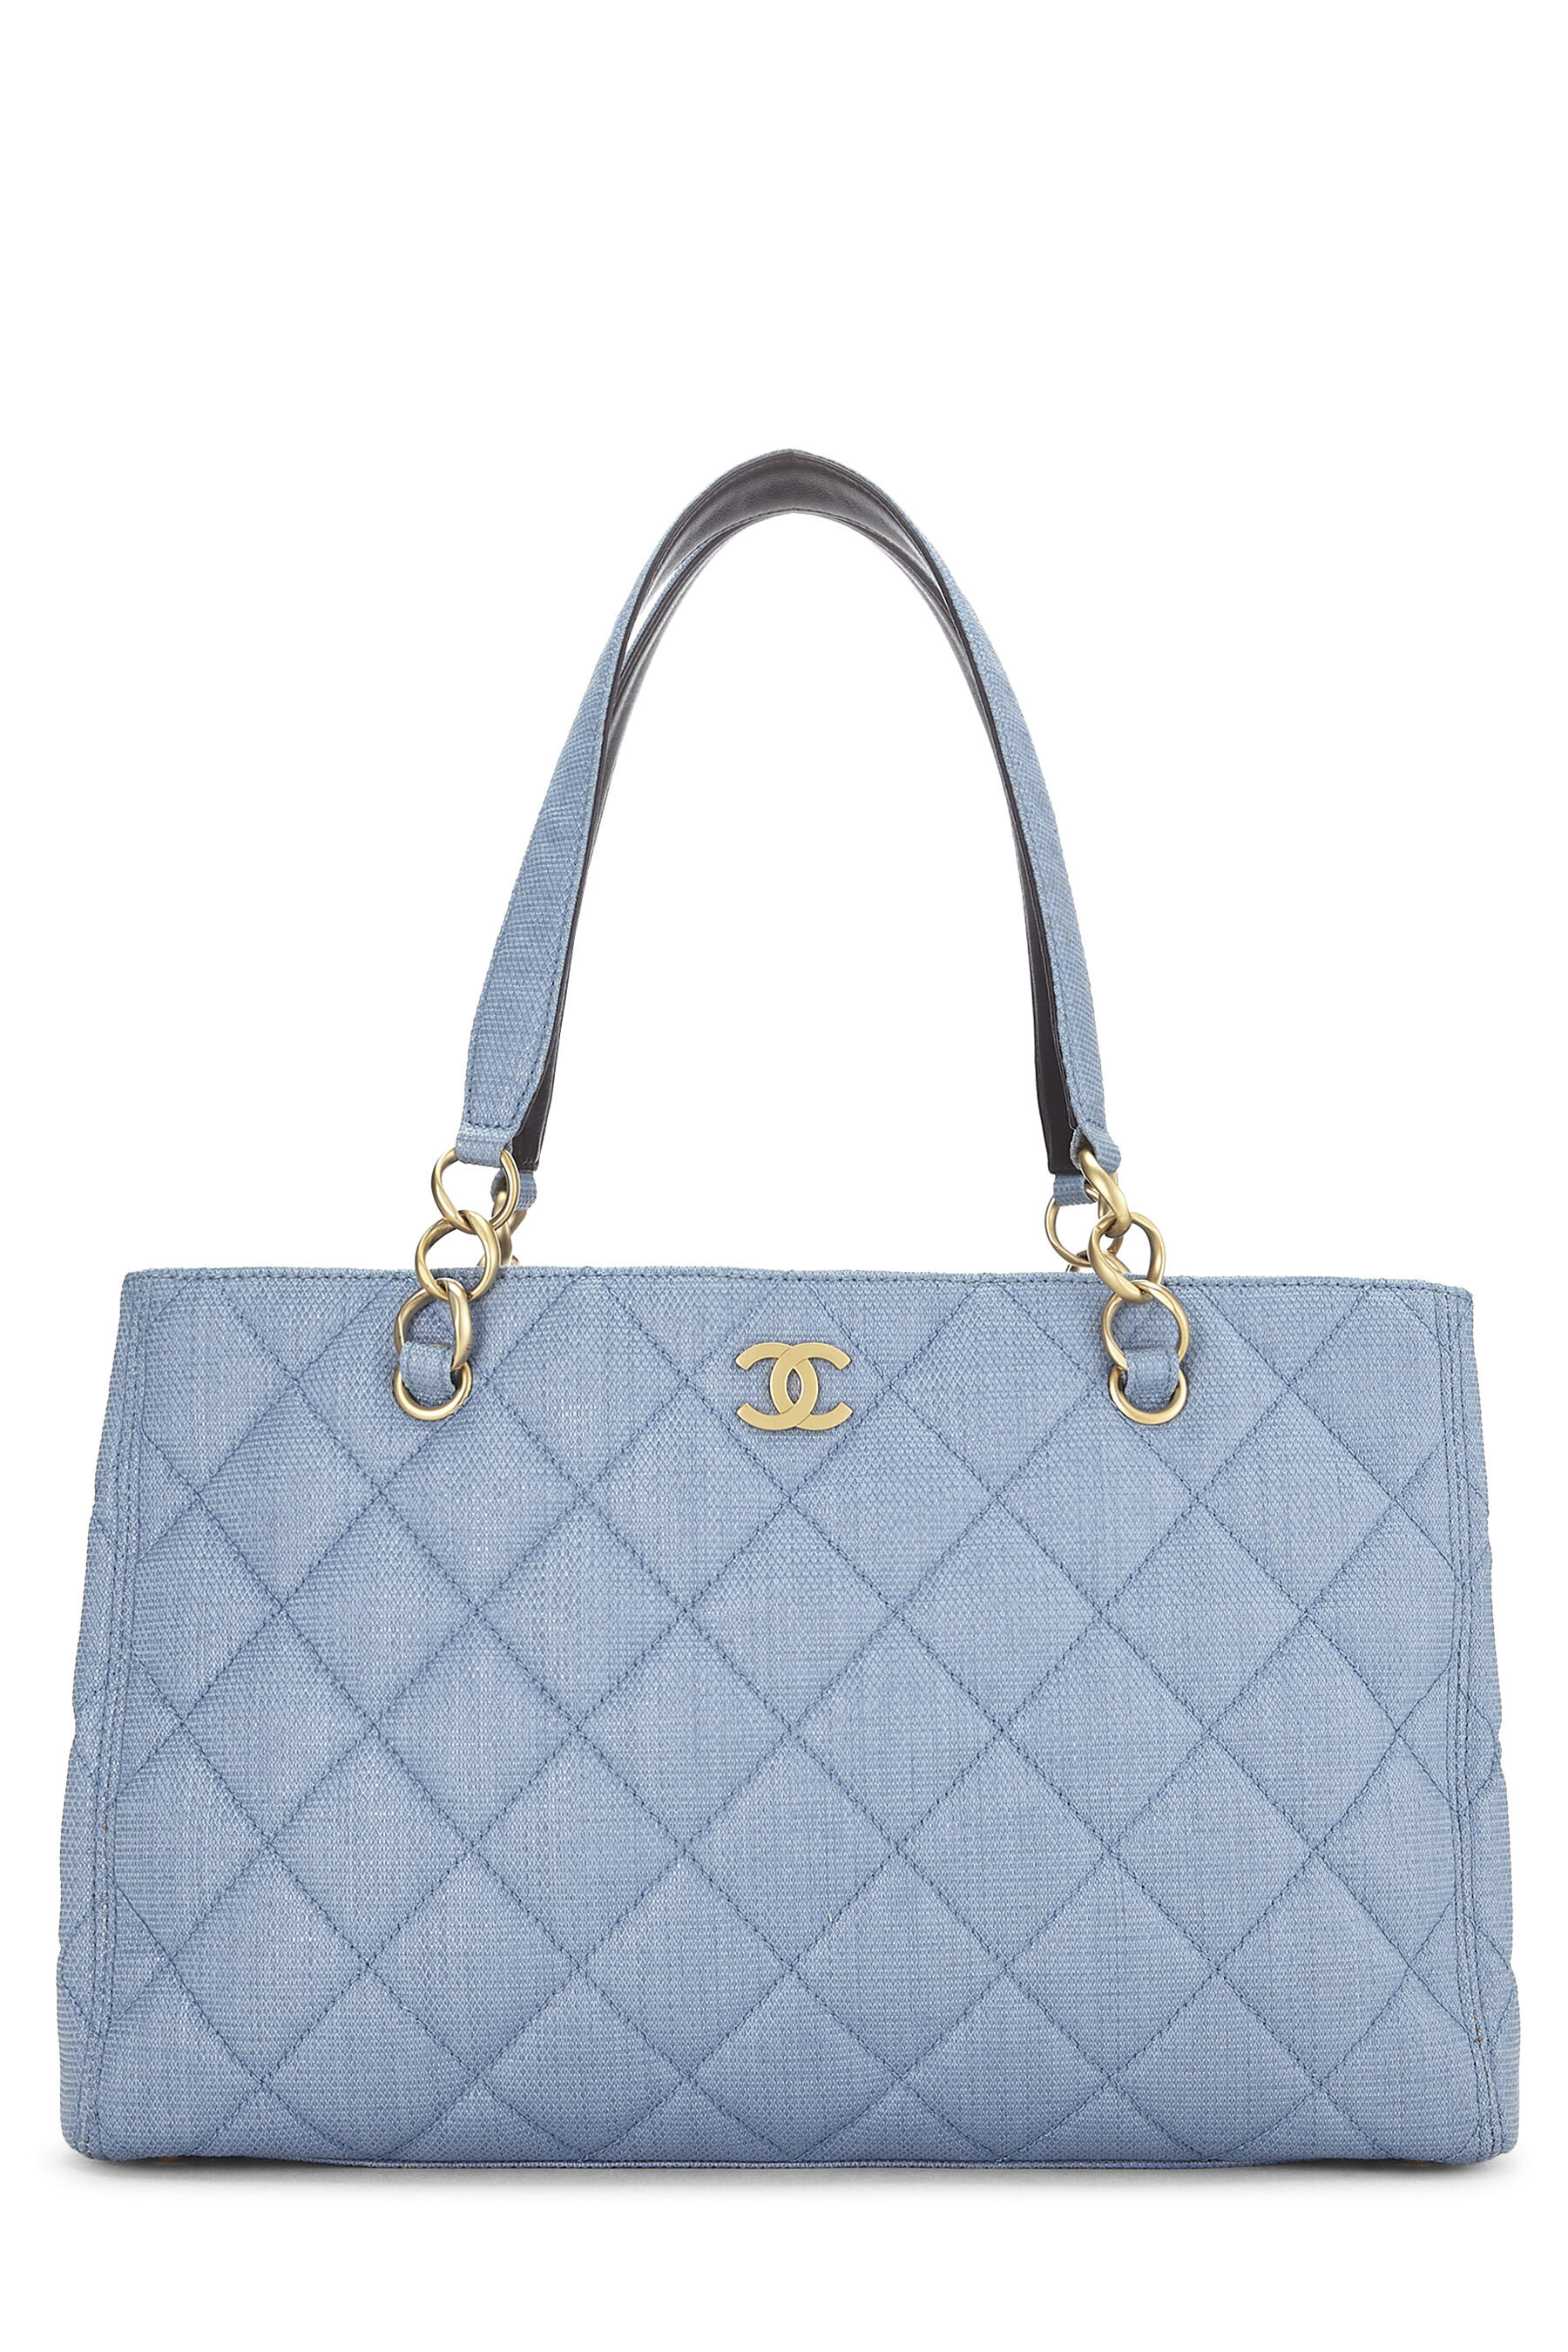 Can You Buy A Chanel Handbag Online? +how to save money on Chanel bags! -  Fashion For Lunch